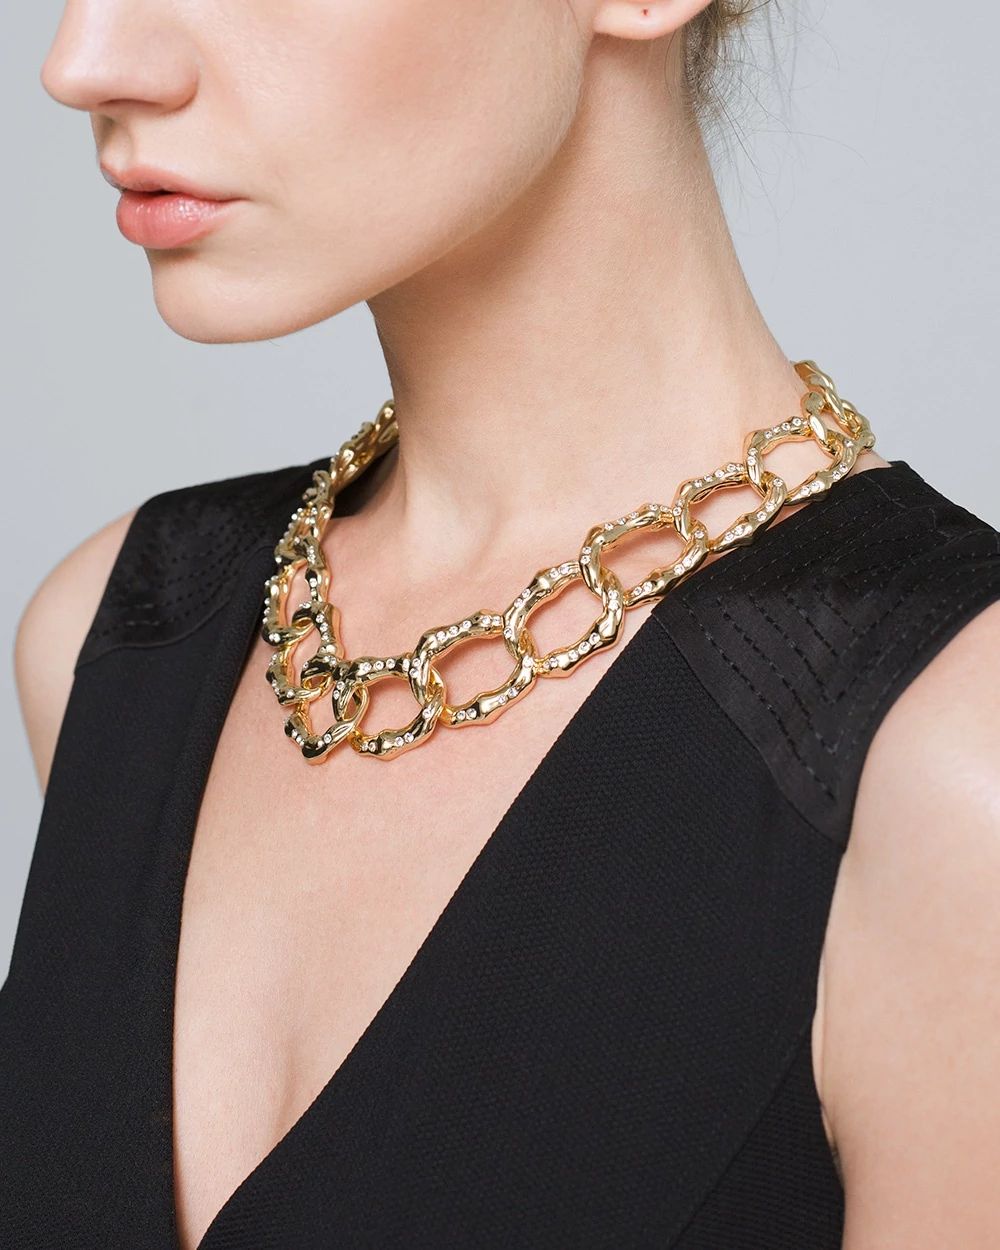 Goldtone Pavé Bamboo Link Necklace click to view larger image.